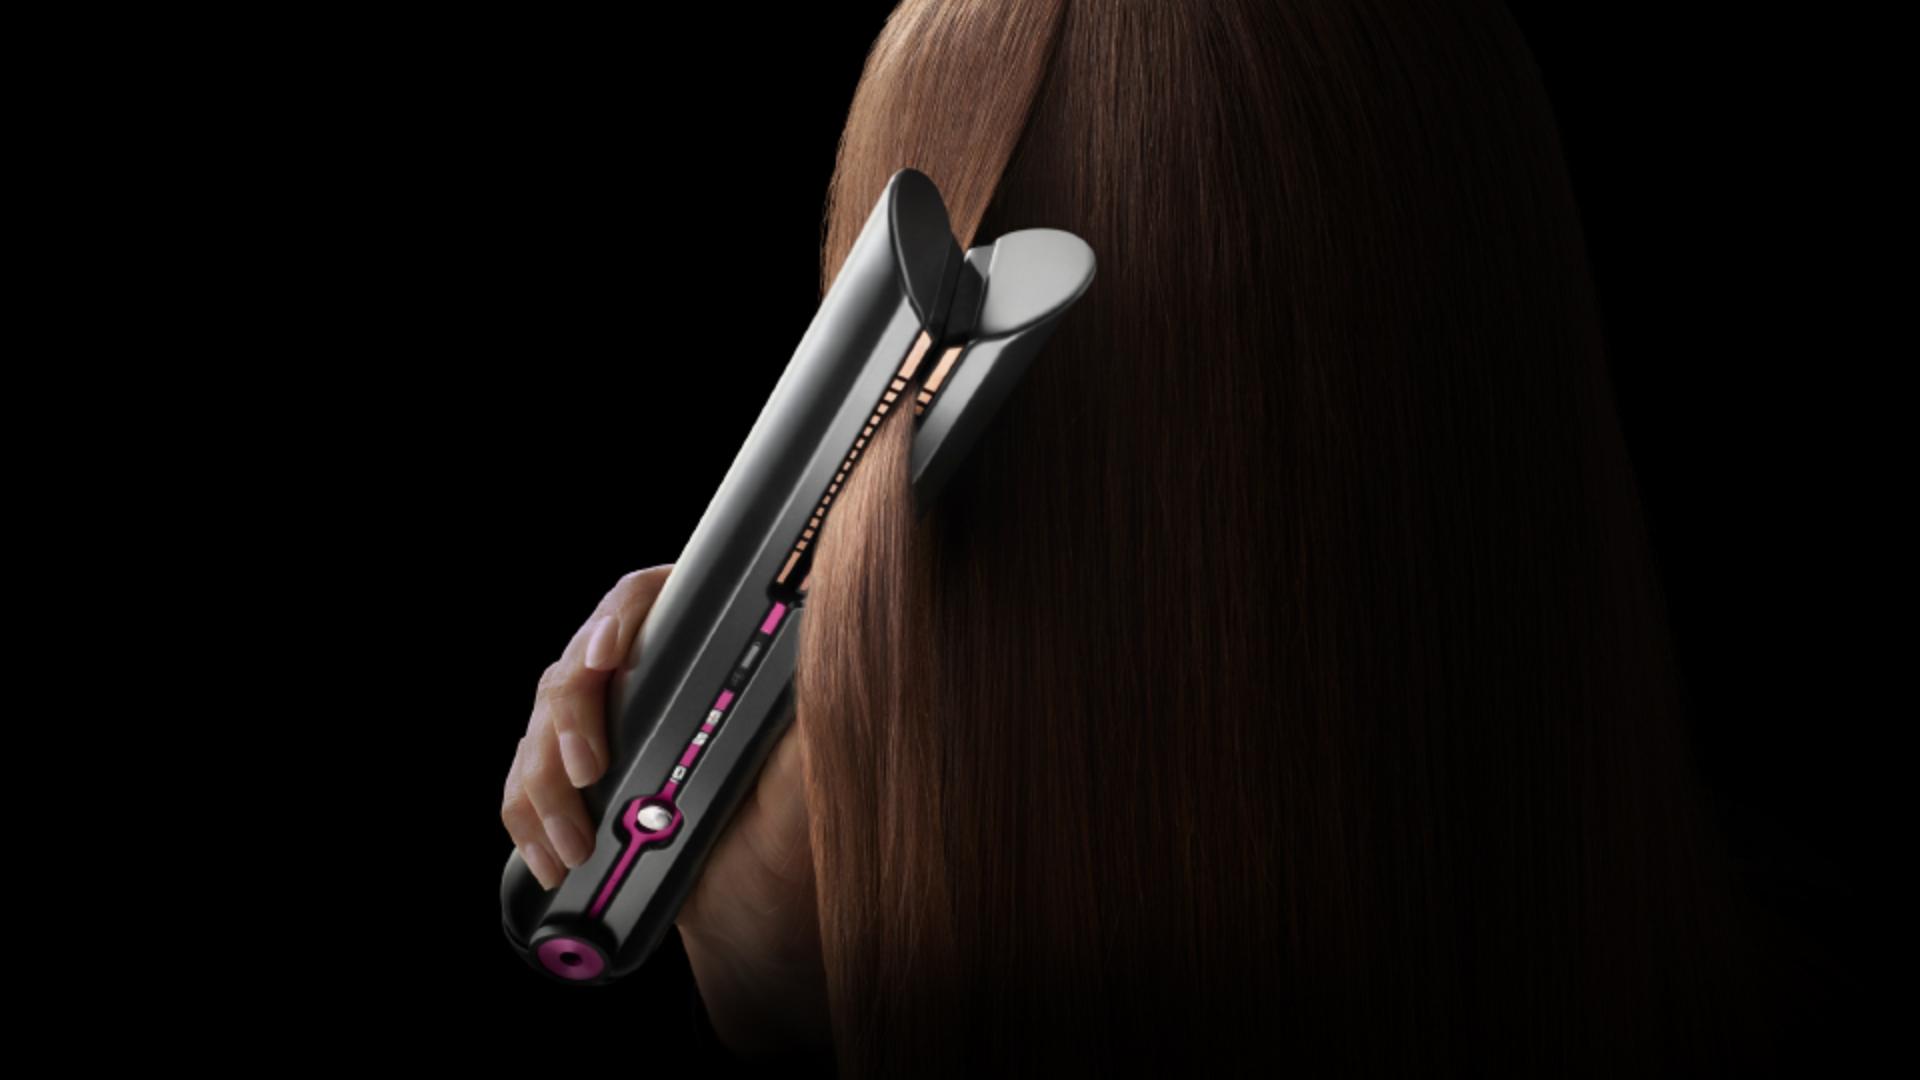 Dyson Corrale hair straightener used on hair with copper flexing plates